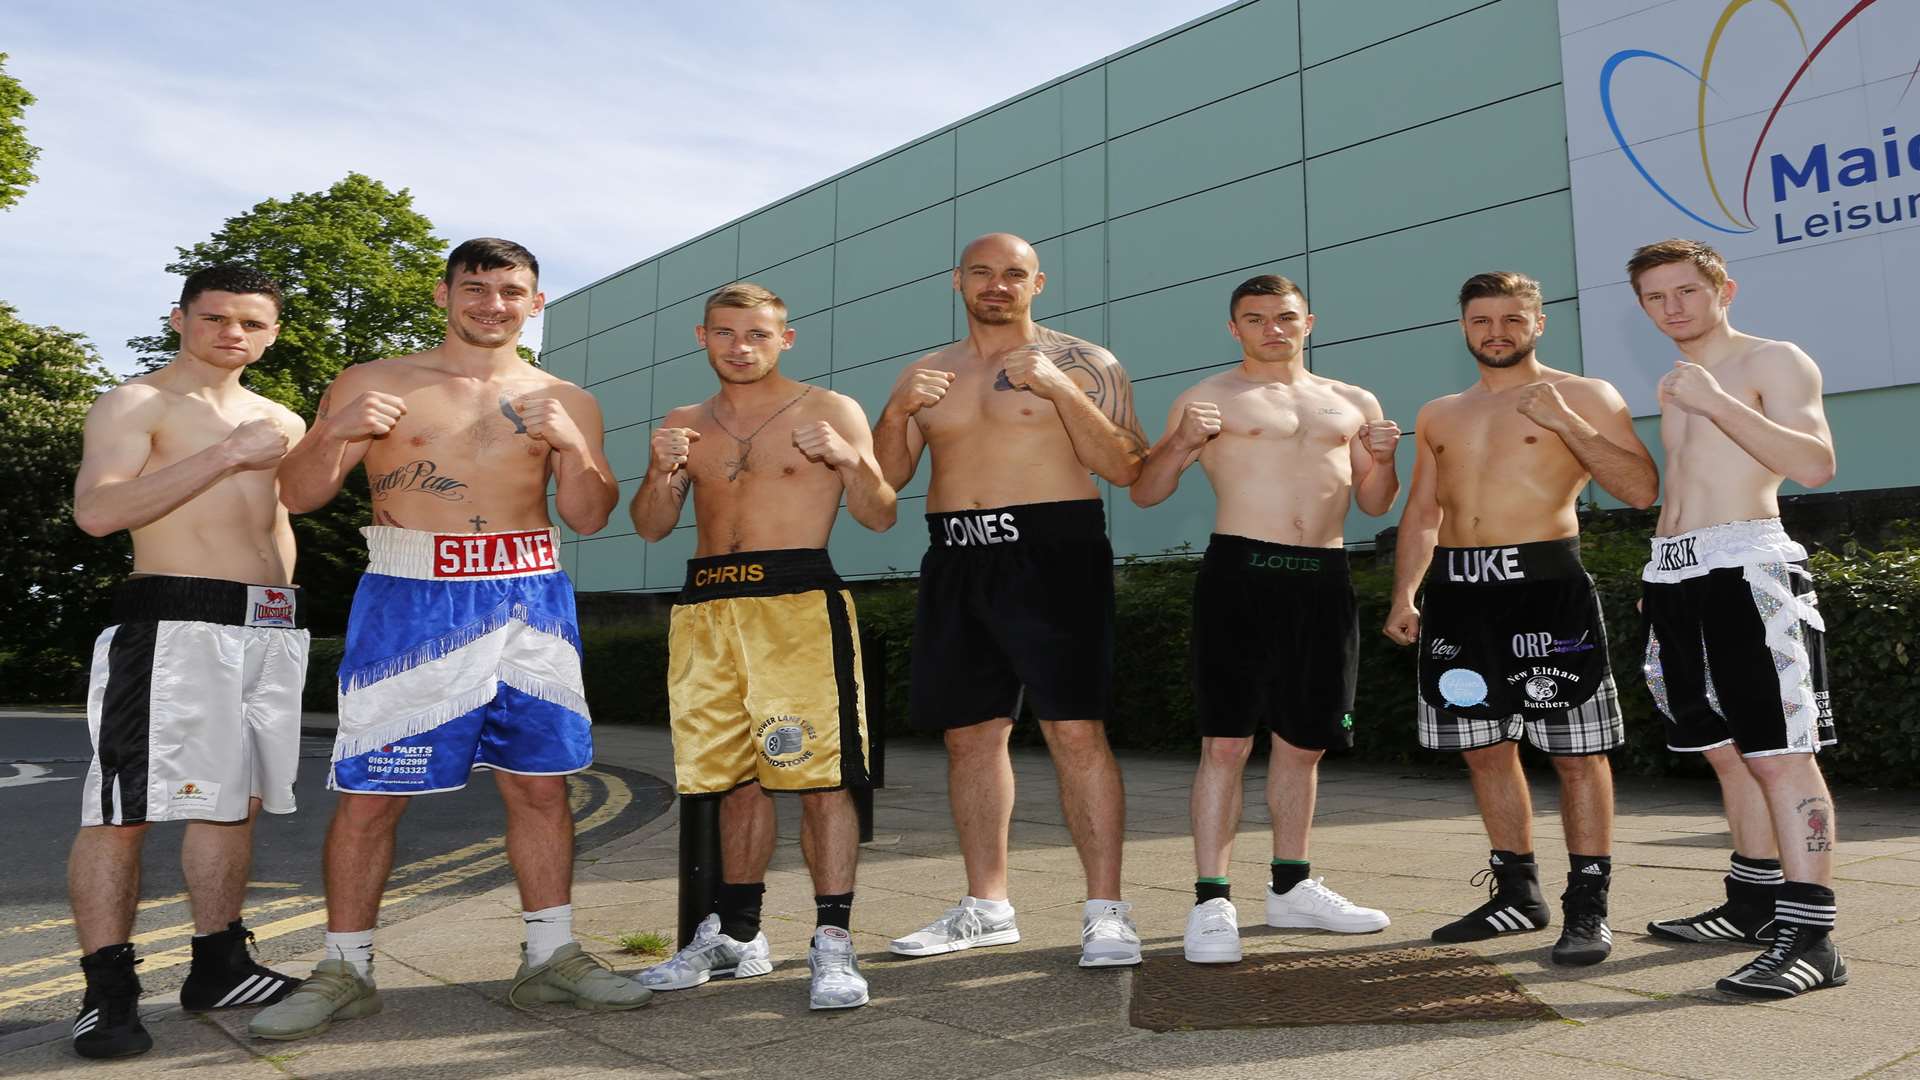 Seven Kent boxers will be fighting on the Mayhem show in Maidstone Picture: Andy Jones